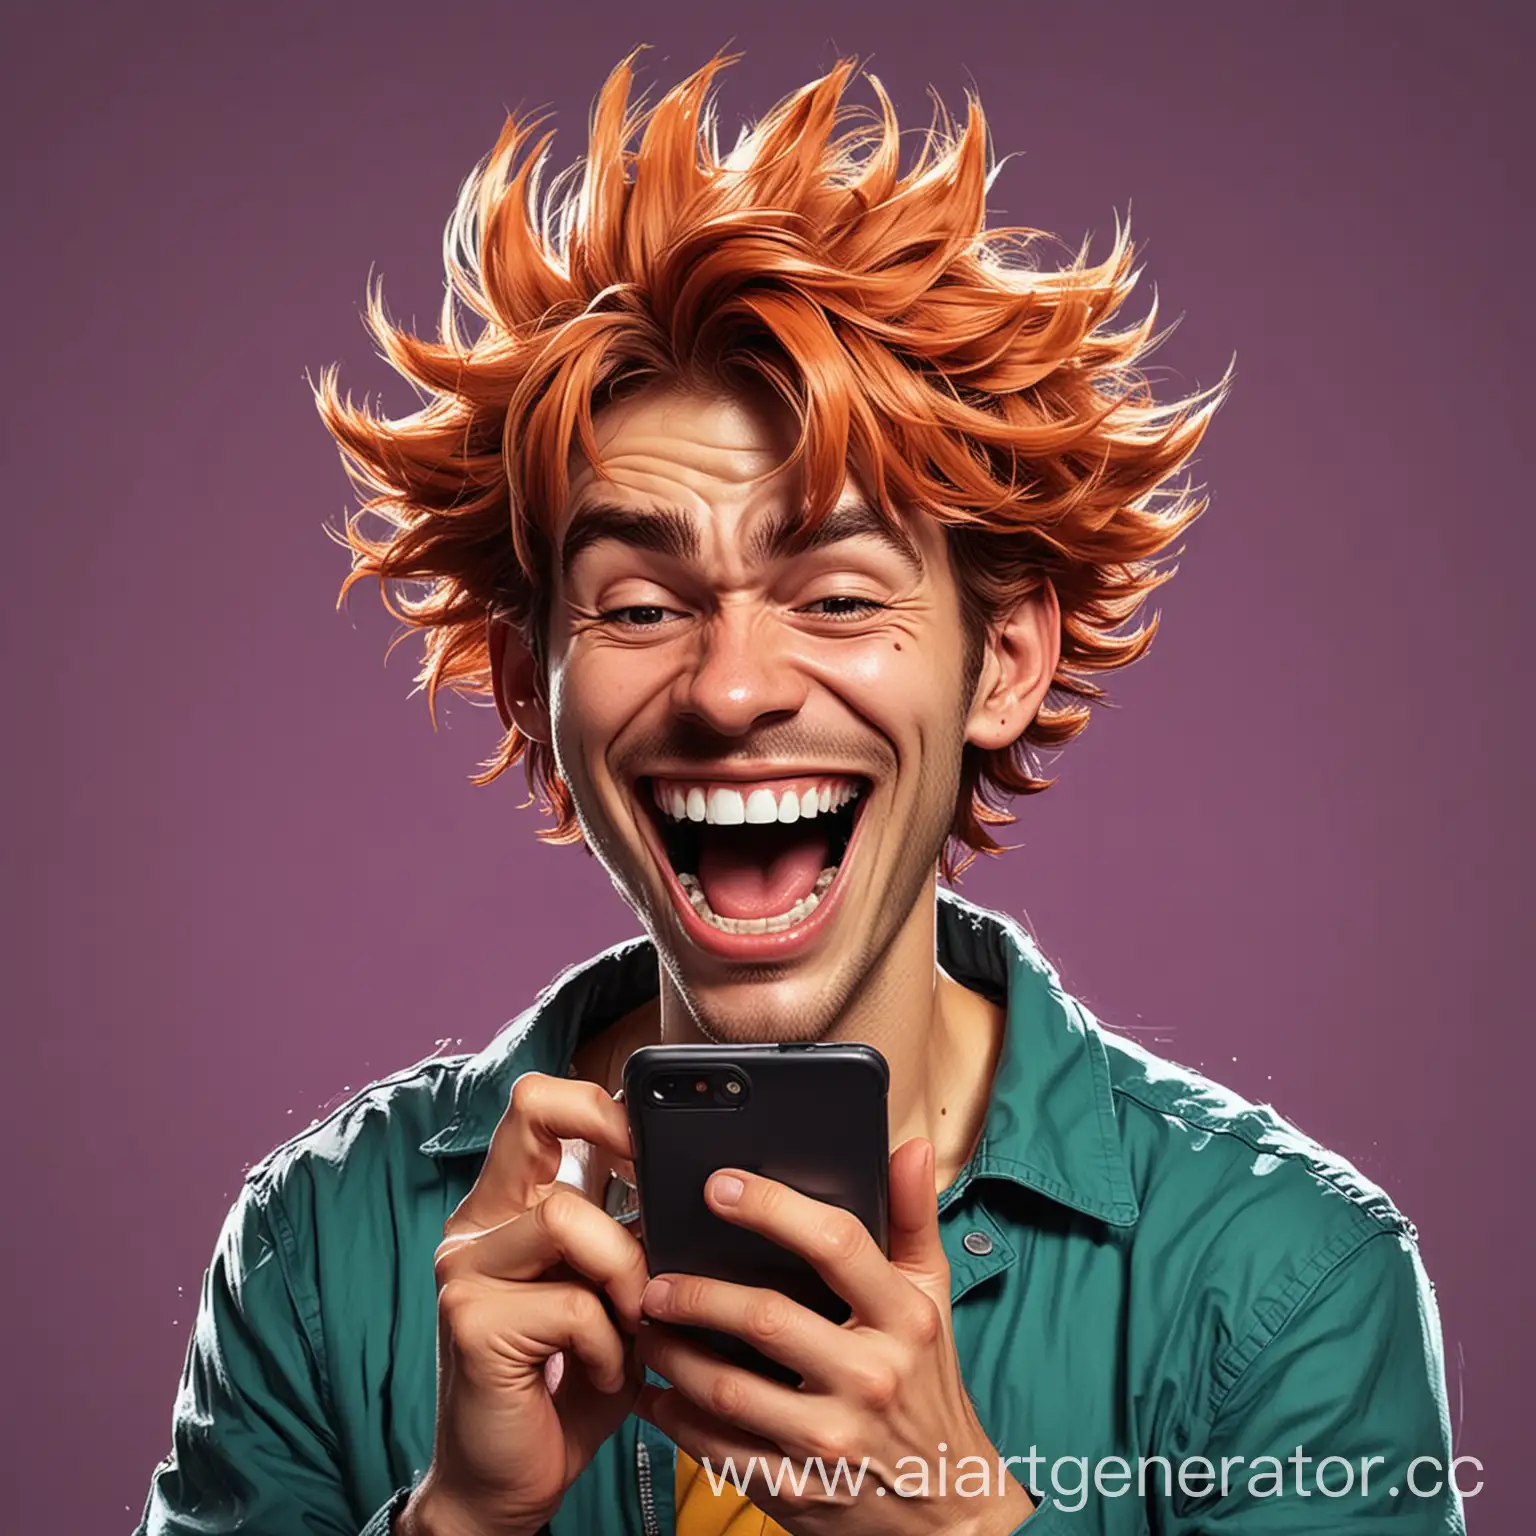 Laughing-Cartoon-Guy-Using-Smartphone-Colorful-Comic-Illustration